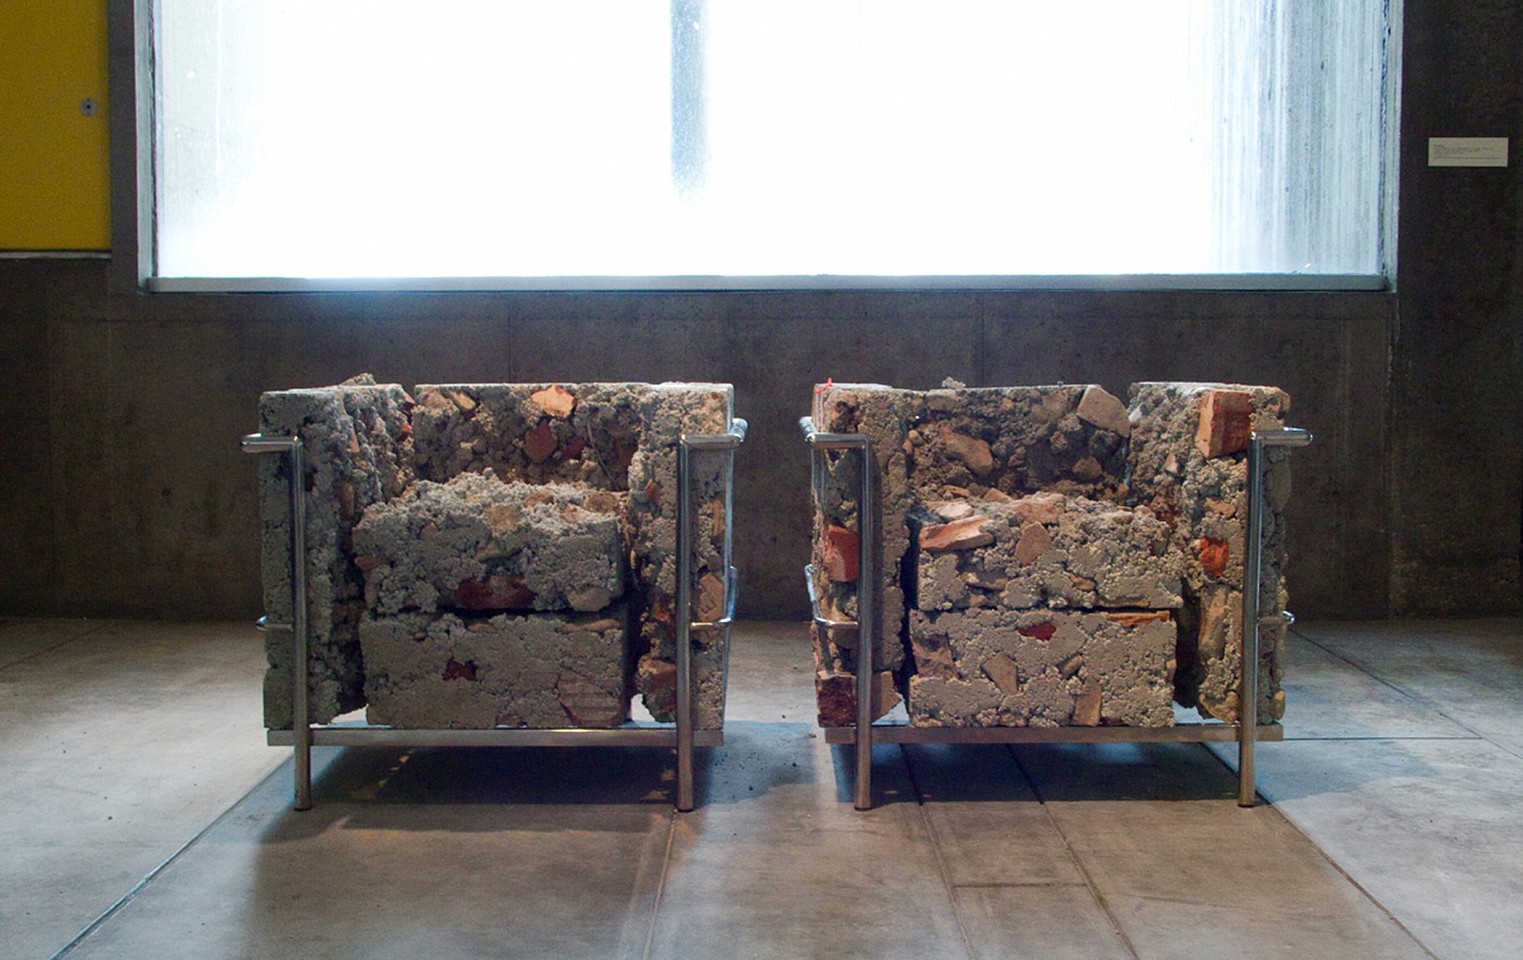 Liz Glynn
On the Museum's Ruin (Morris Hunt - Corbusier - Piano) I & II, 2011
Rubble from the demolition of the Fogg Museum, lightweight concrete aggregate and stainless steel LC2 chair frame, 30 x 26 1/2 x 28 in.